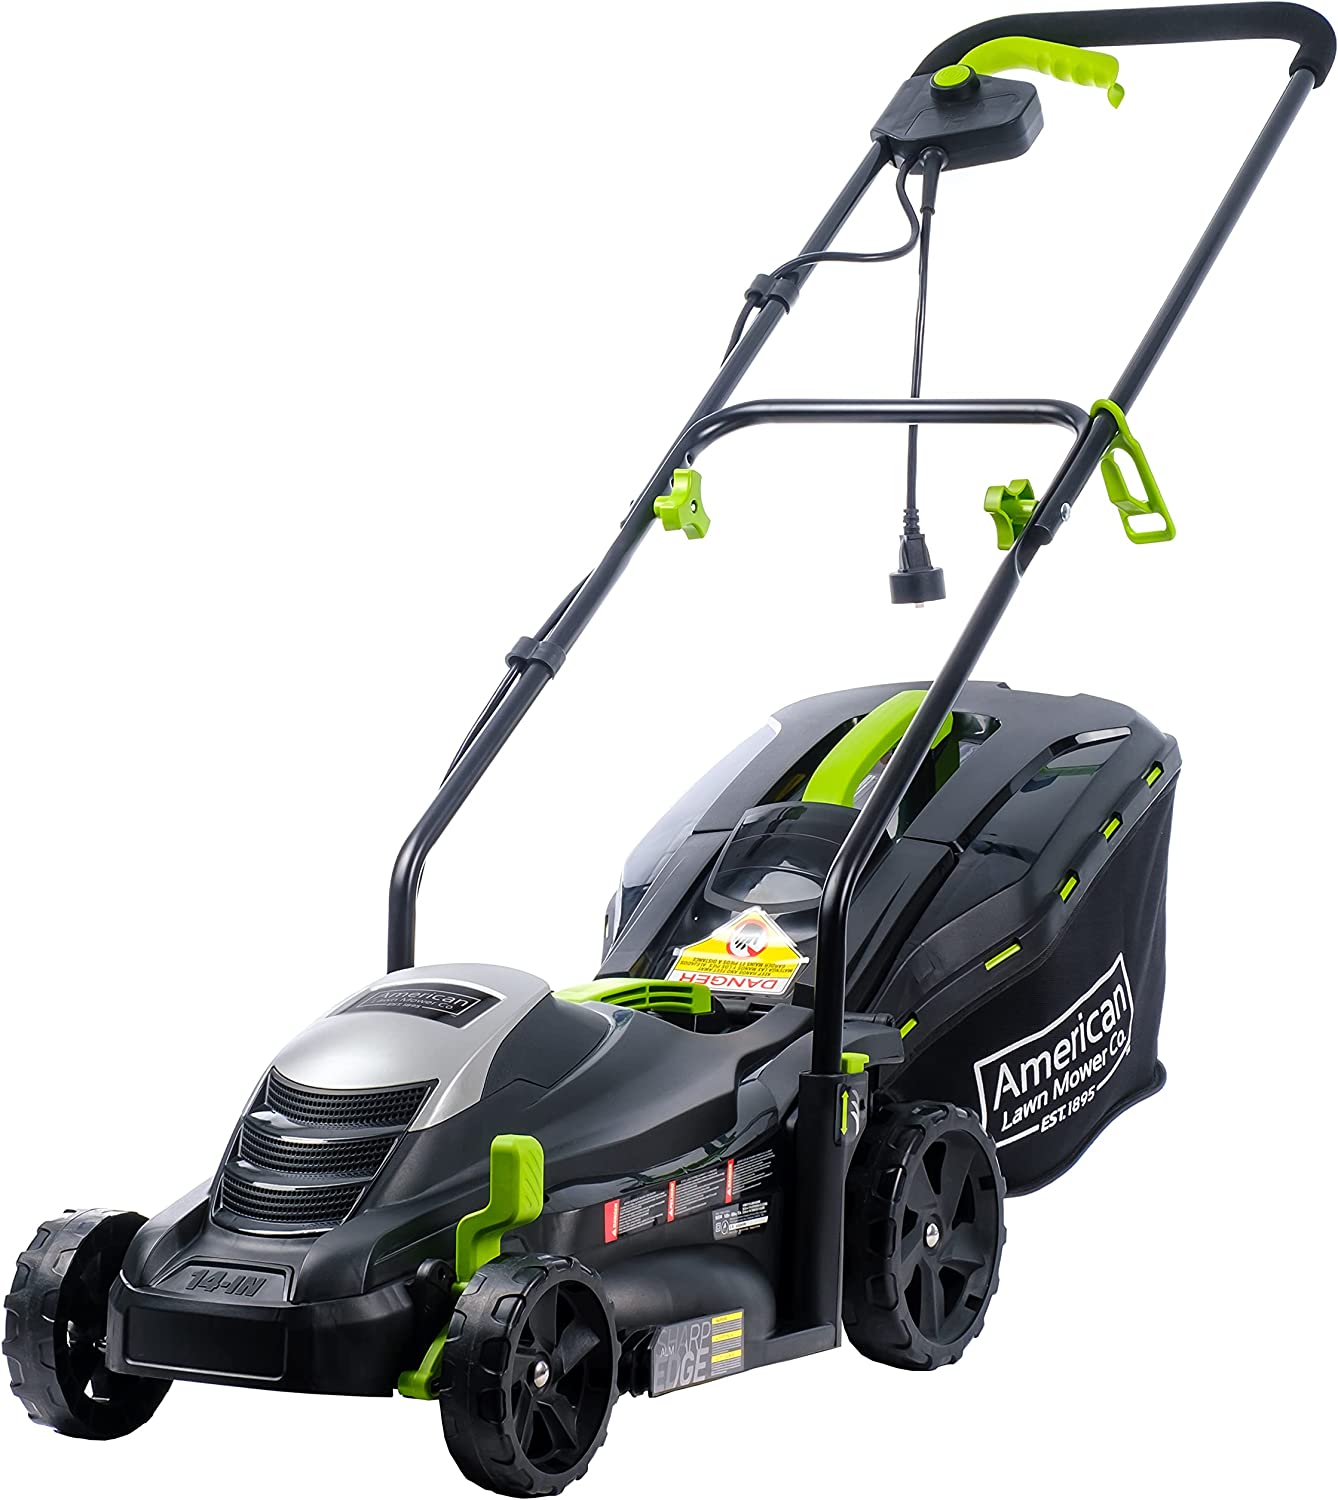 American Lawn Mower Company Corded Electric Lawn Mower – Just $140.20 at Amazon